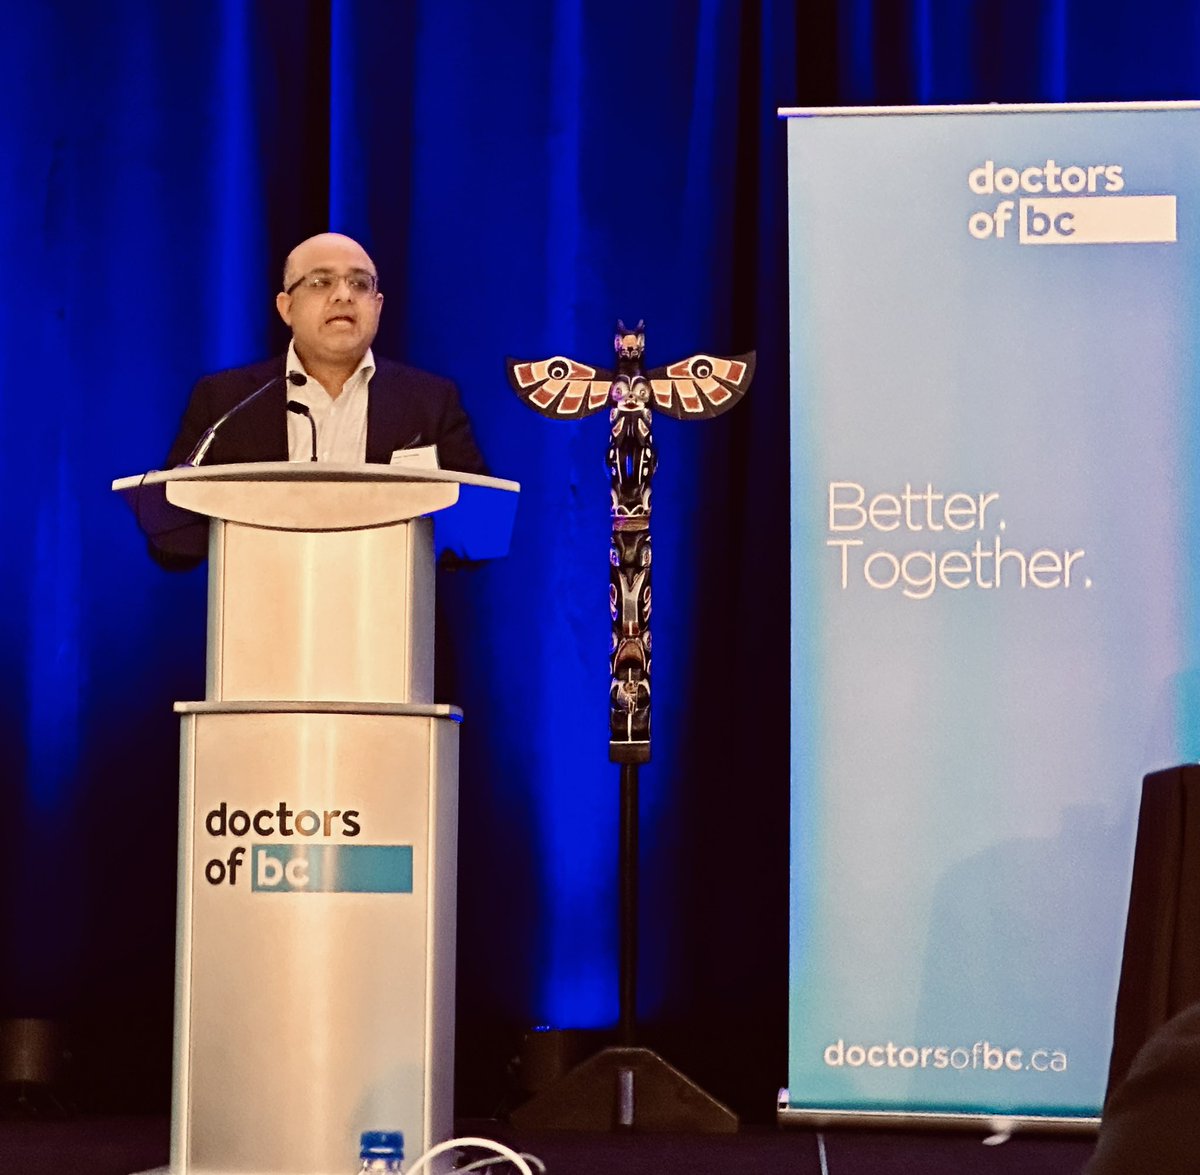 Inspiring address by our President Dr. @ahmerkarimuddin at the Representative Assembly for the @DoctorsOfBC ! Thank you for your words, for your leadership, and for your willingness to support our association, our profession, and our patients. #BetterTogether #Neveralone